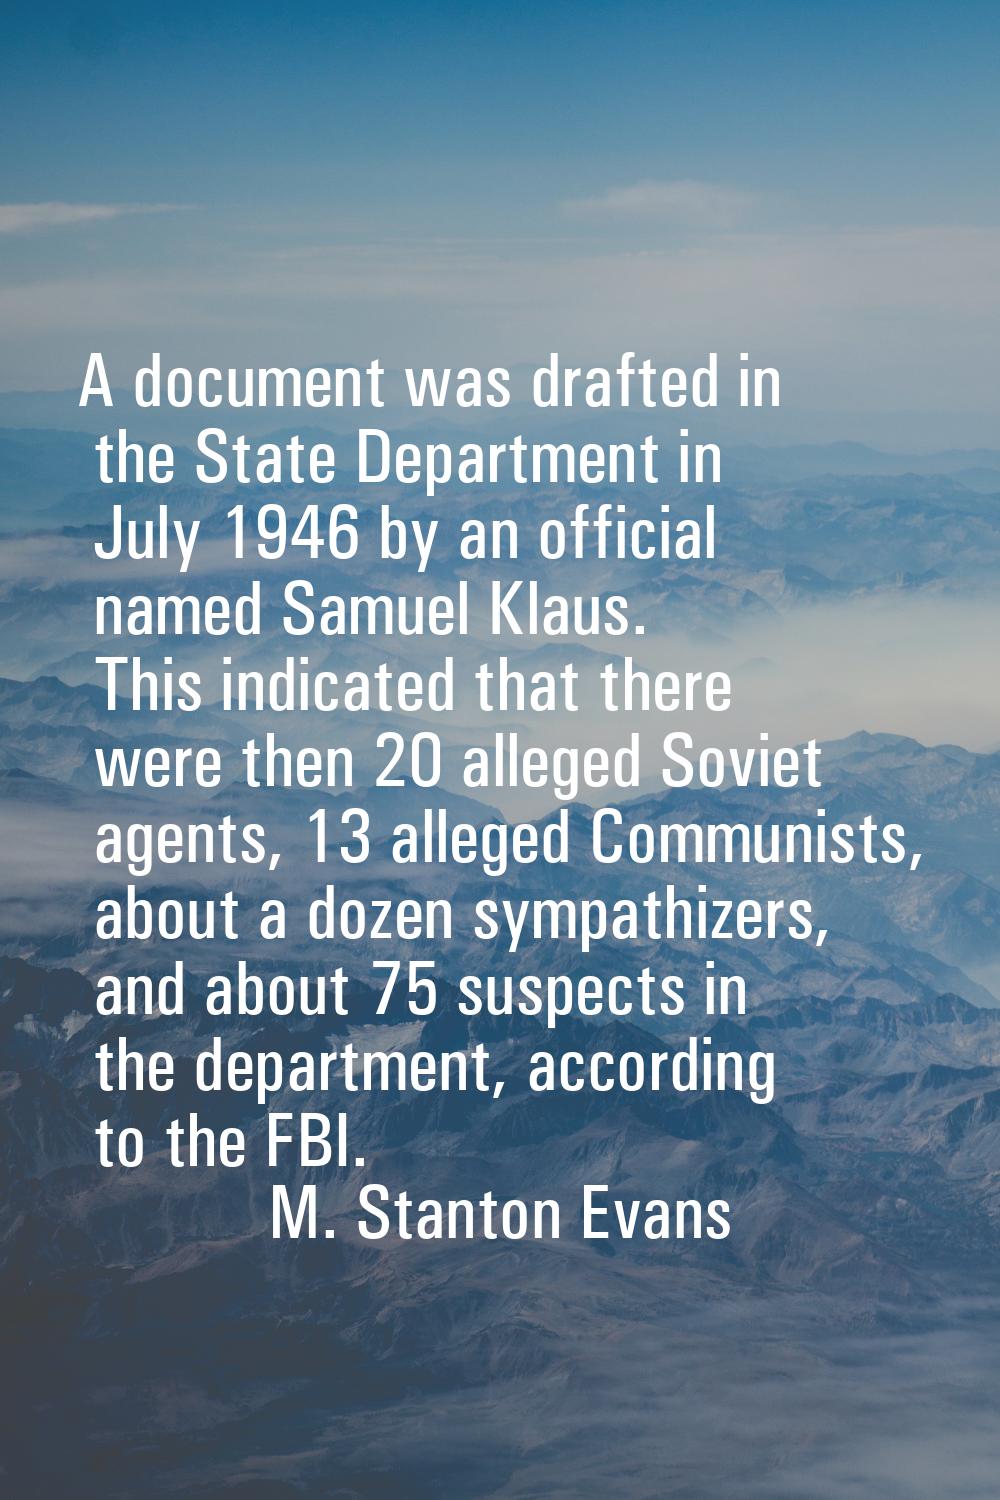 A document was drafted in the State Department in July 1946 by an official named Samuel Klaus. This